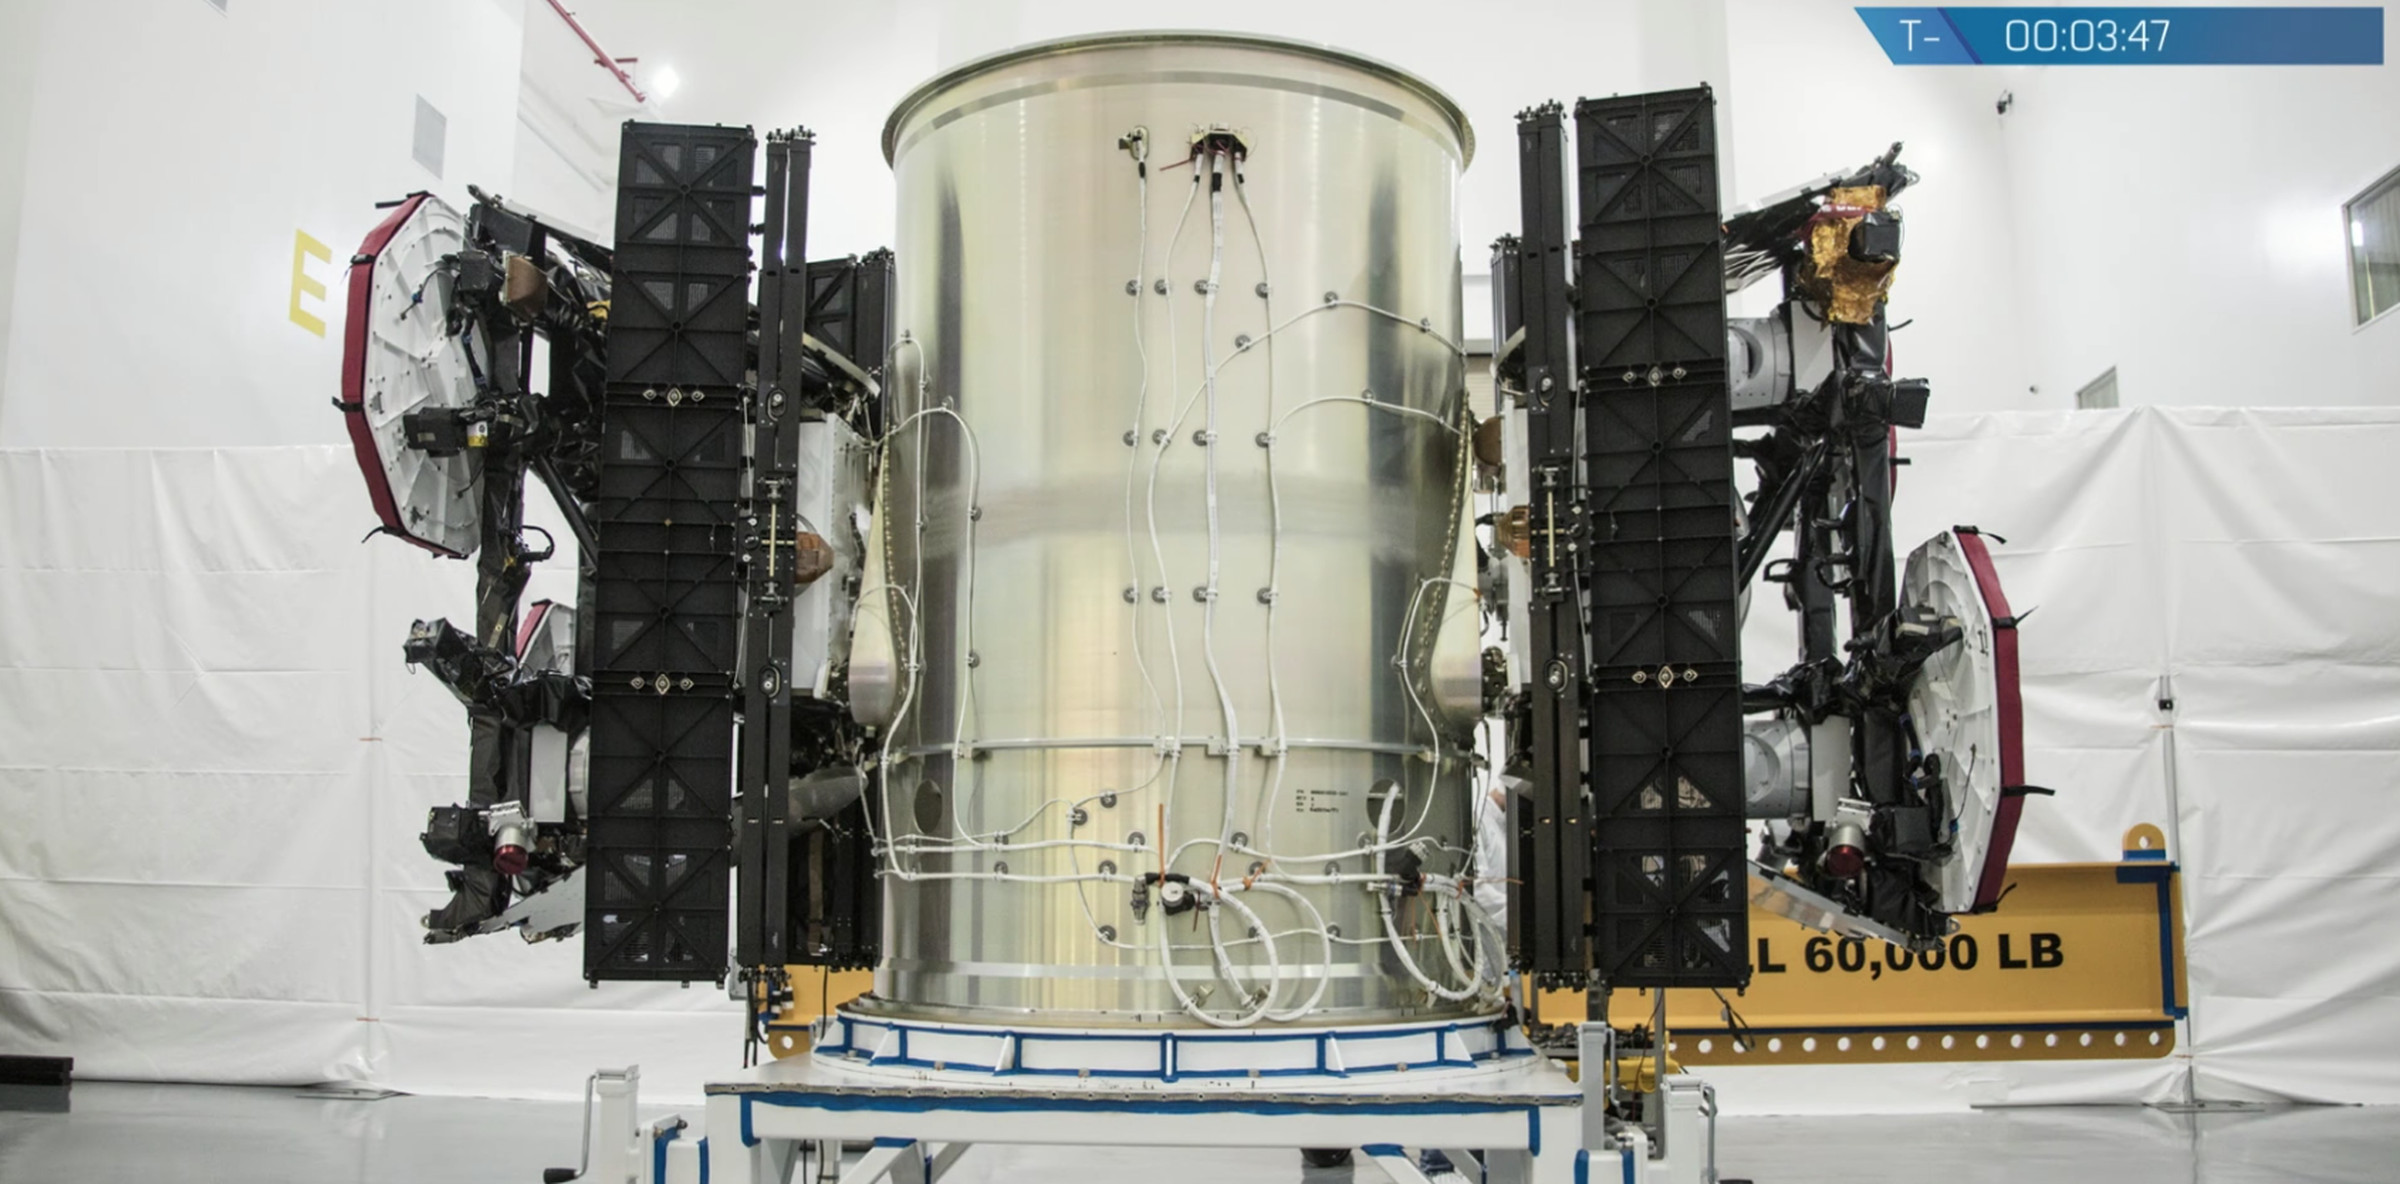 One of SpaceX’s test satellites for beaming internet, which was launched in February.